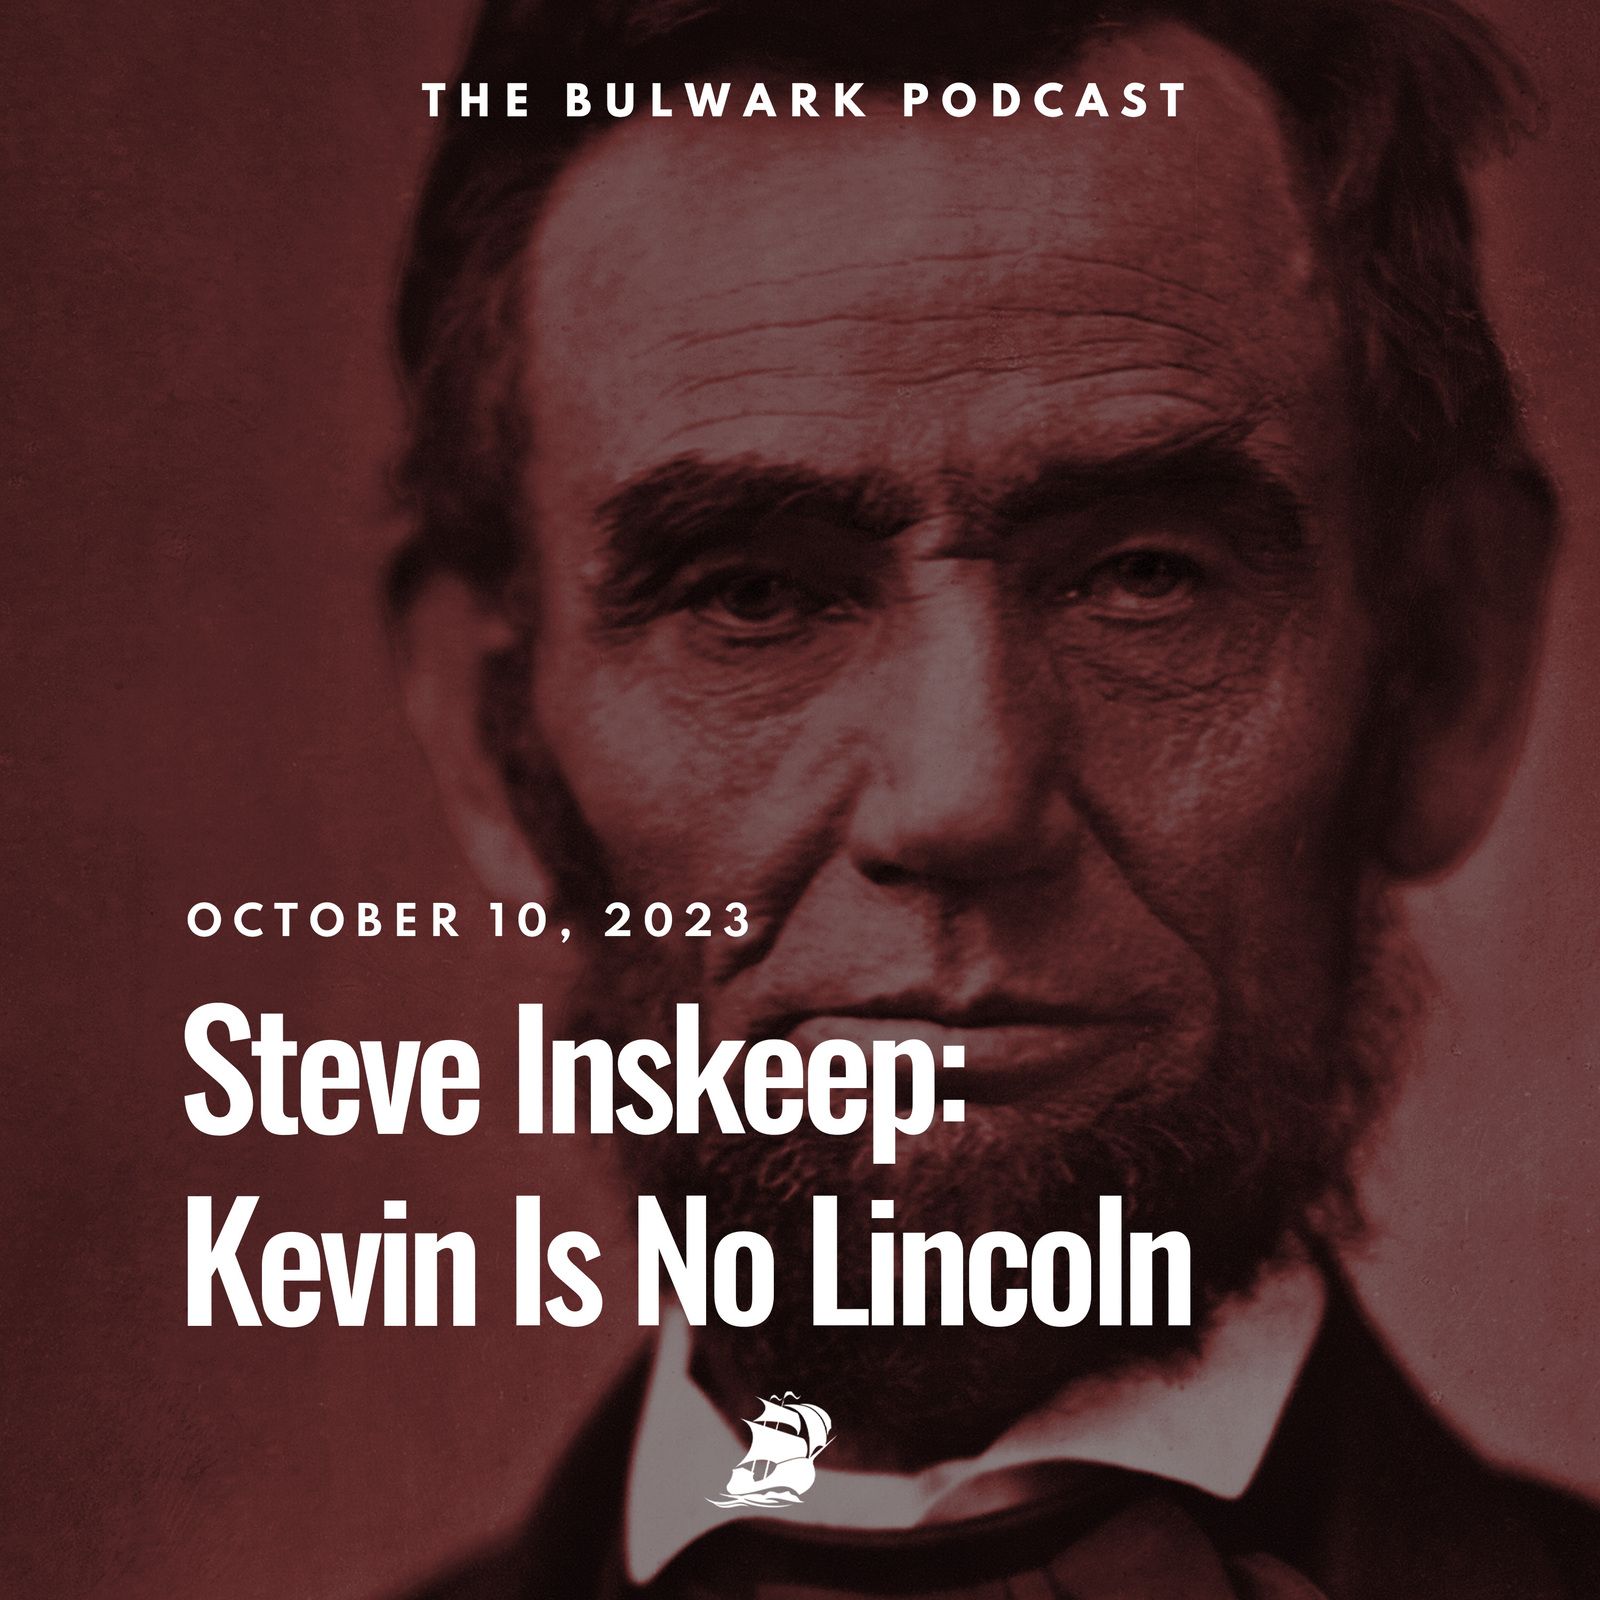 Steve Inskeep: Kevin Is No Lincoln by The Bulwark Podcast